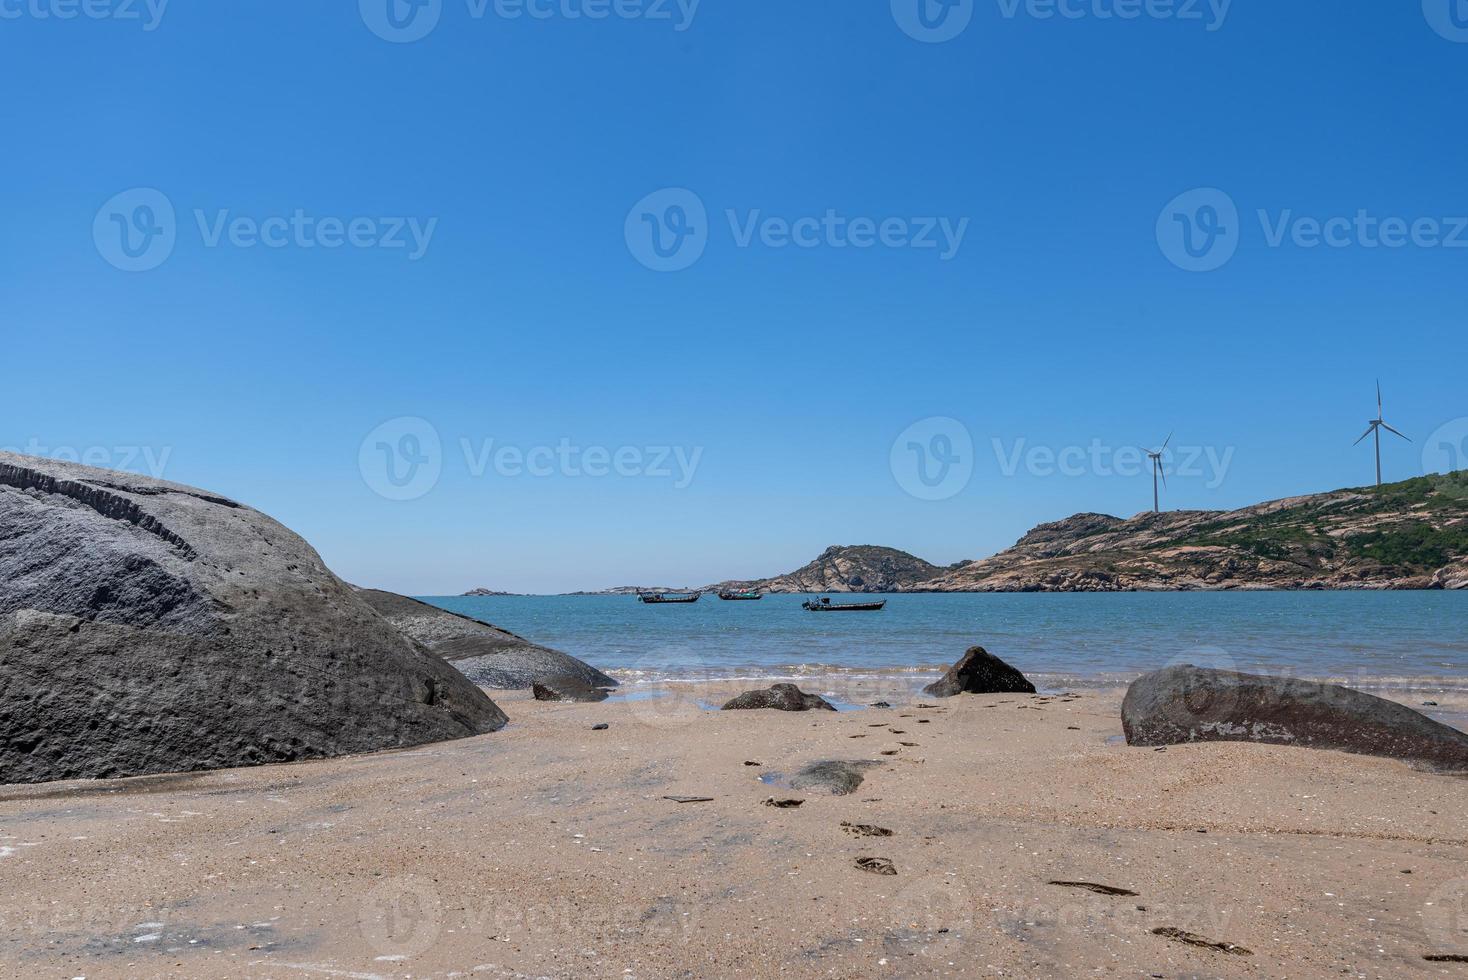 The sea under the blue sky, clean beaches and sea water, as well as islands and windmills photo